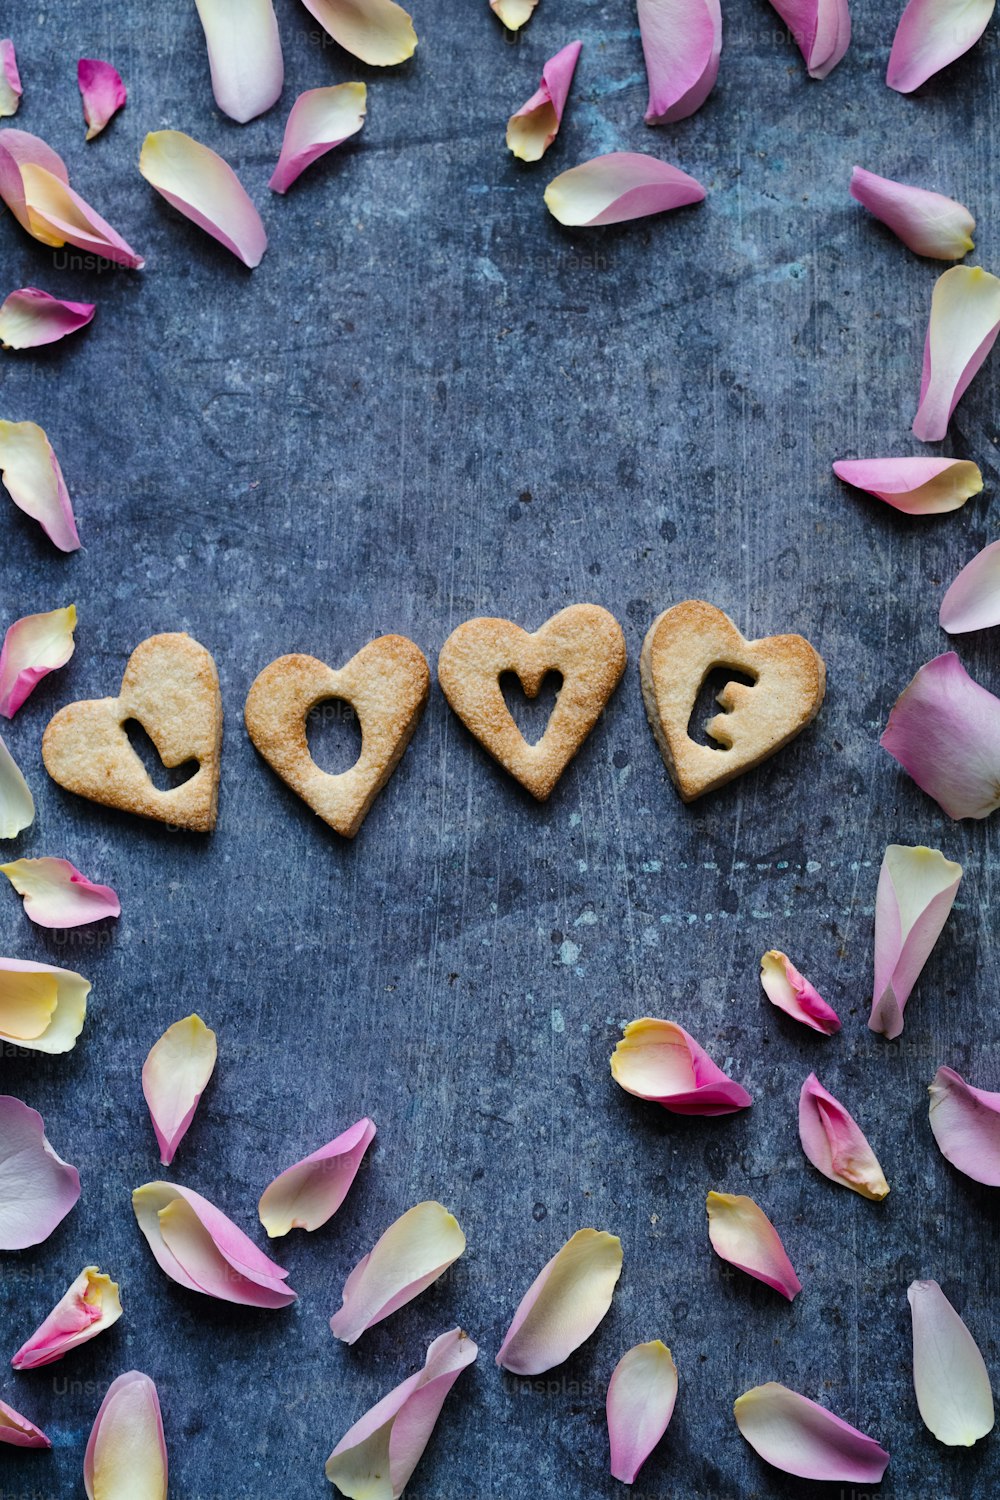 the word love spelled out in small hearts surrounded by petals